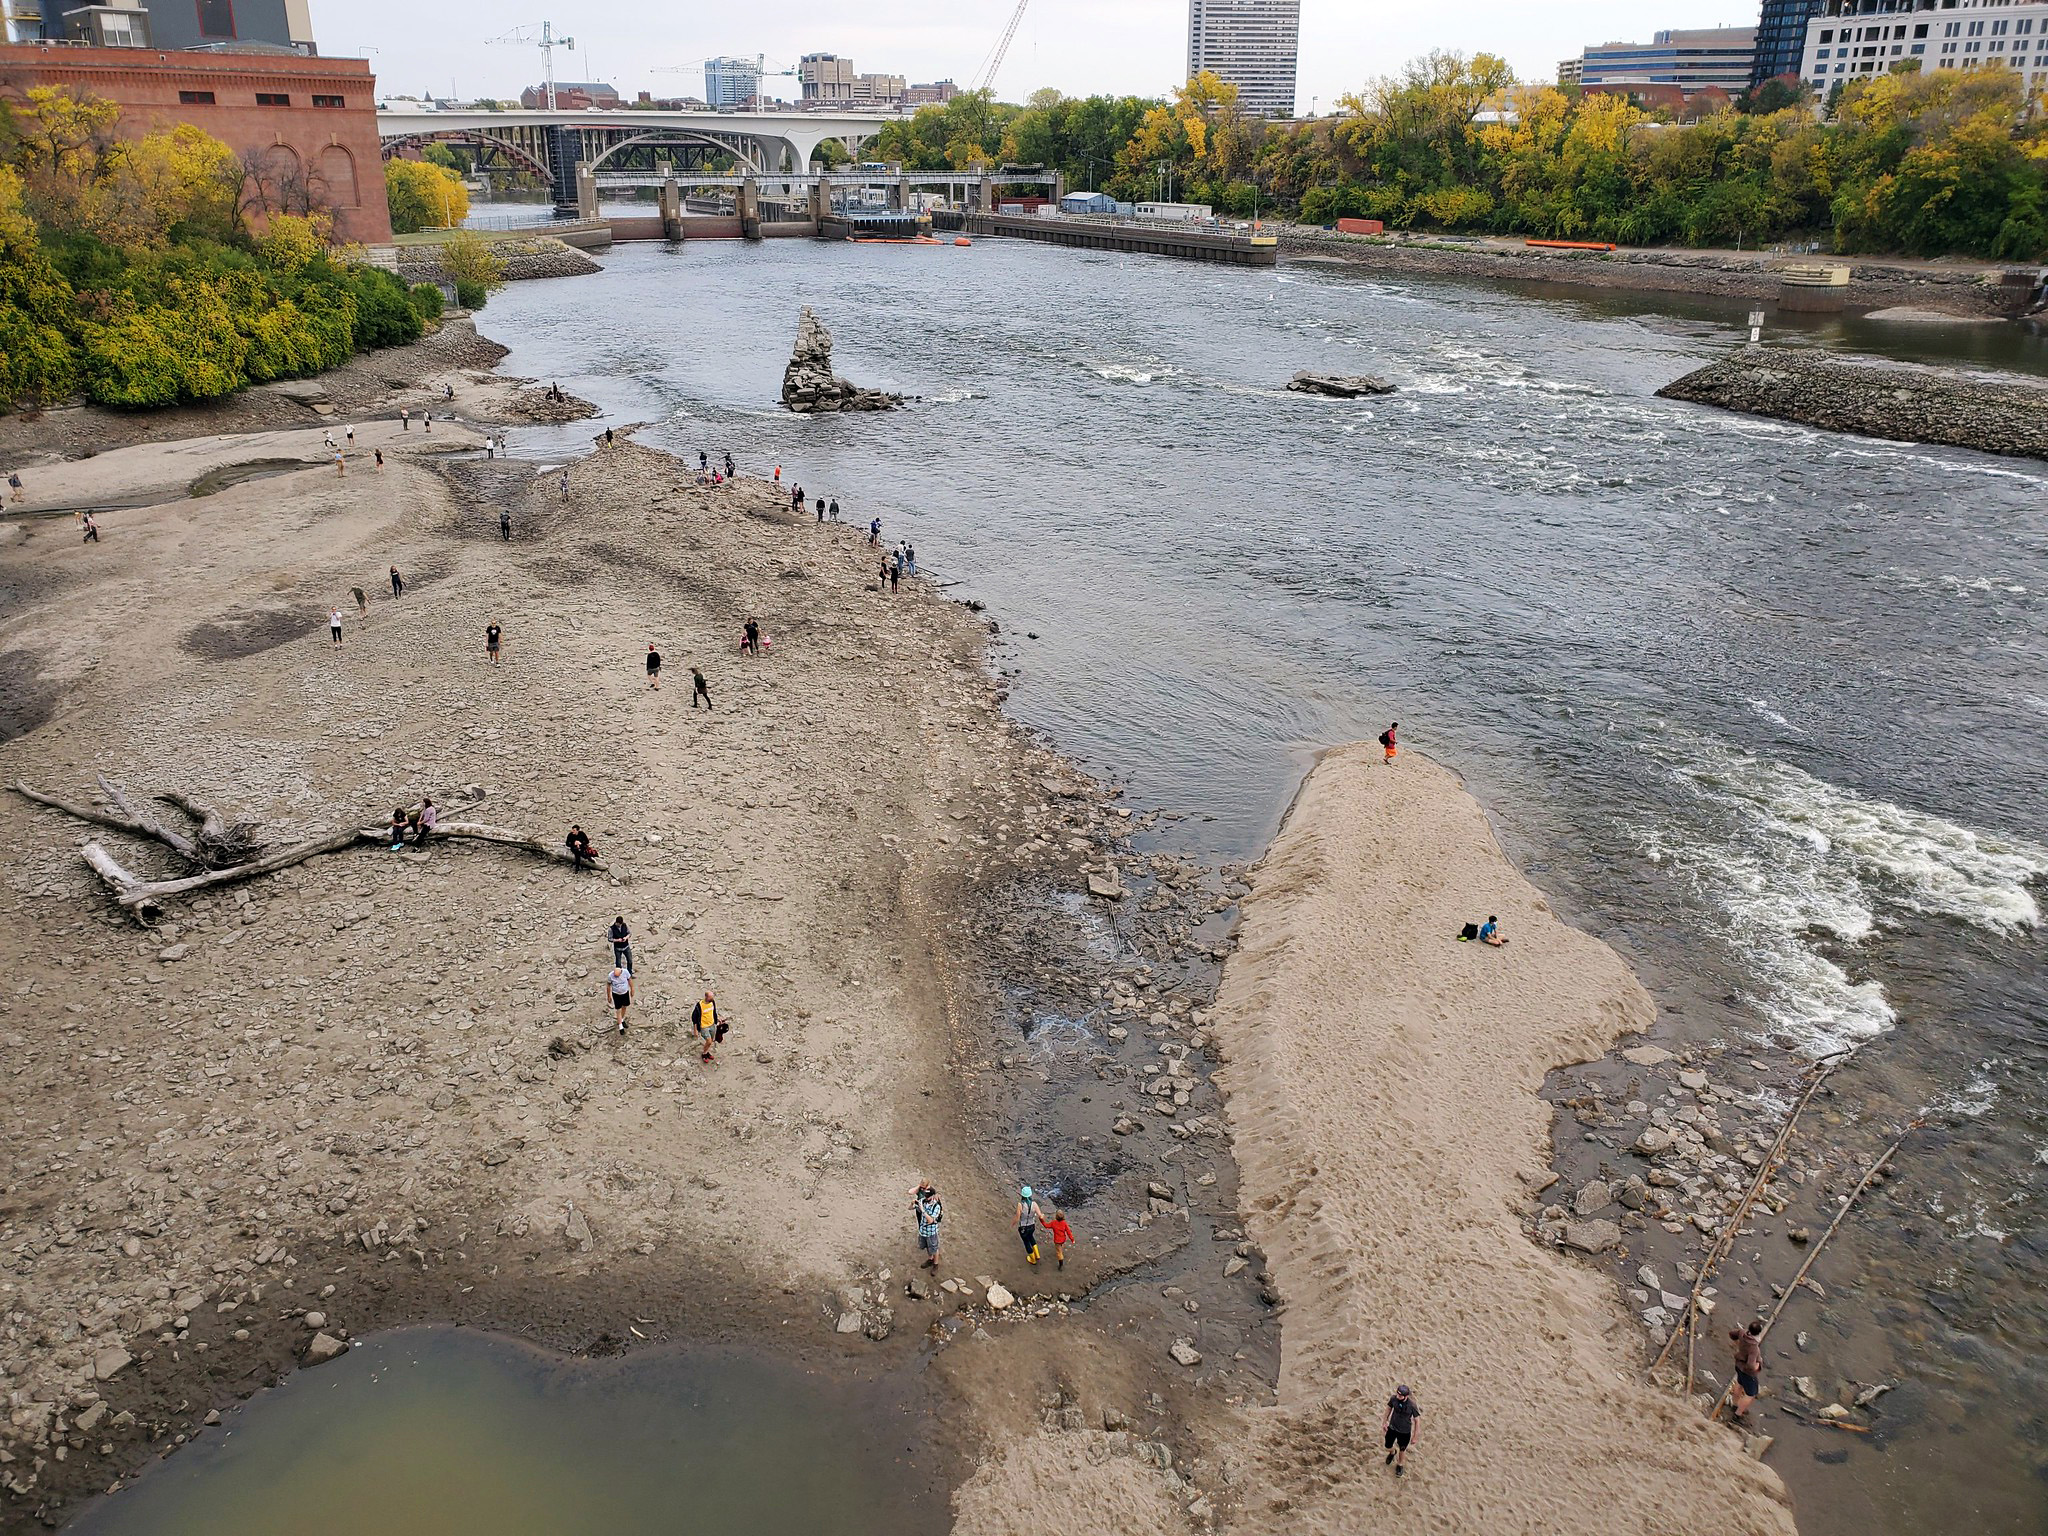 Mississippi with people walking on partially exposed riverbed